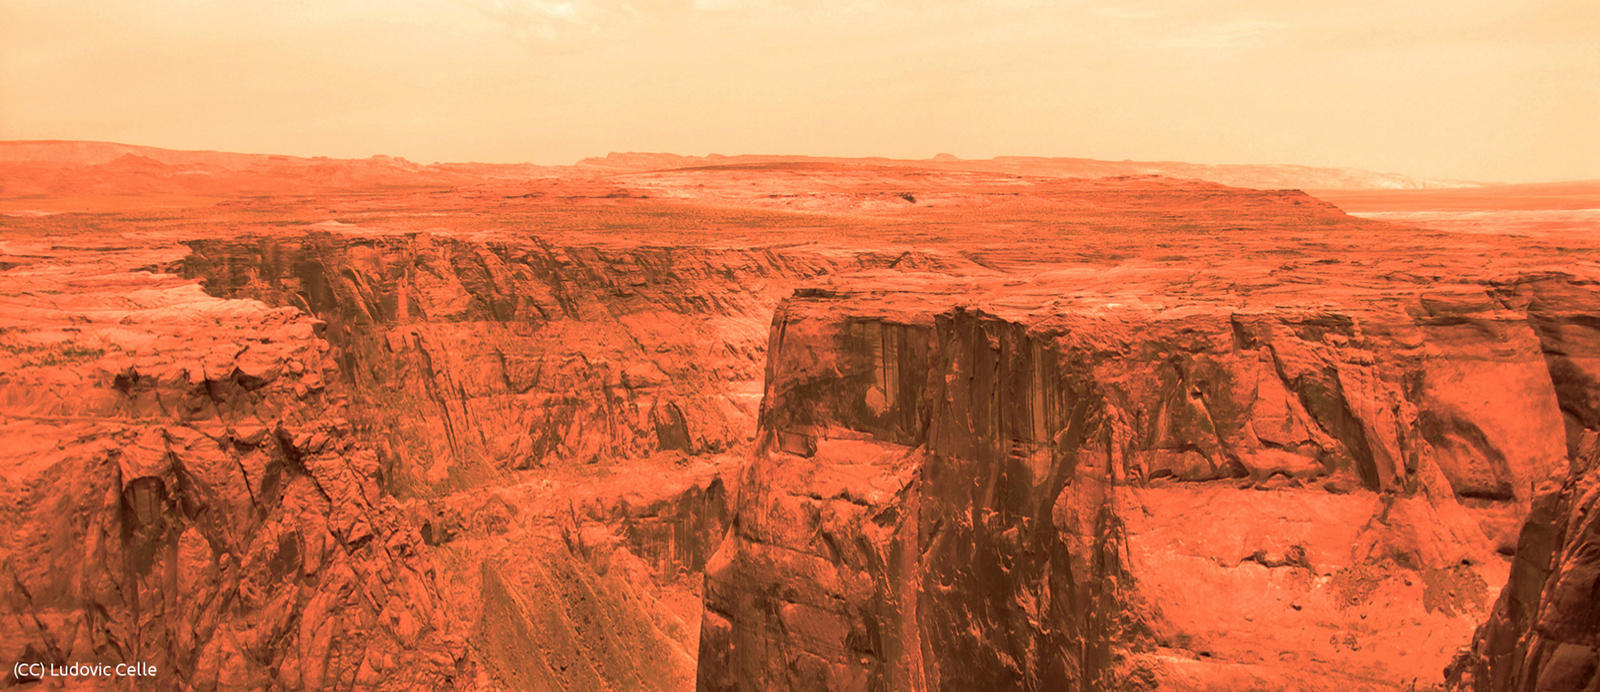 Mars landscape from photo 01